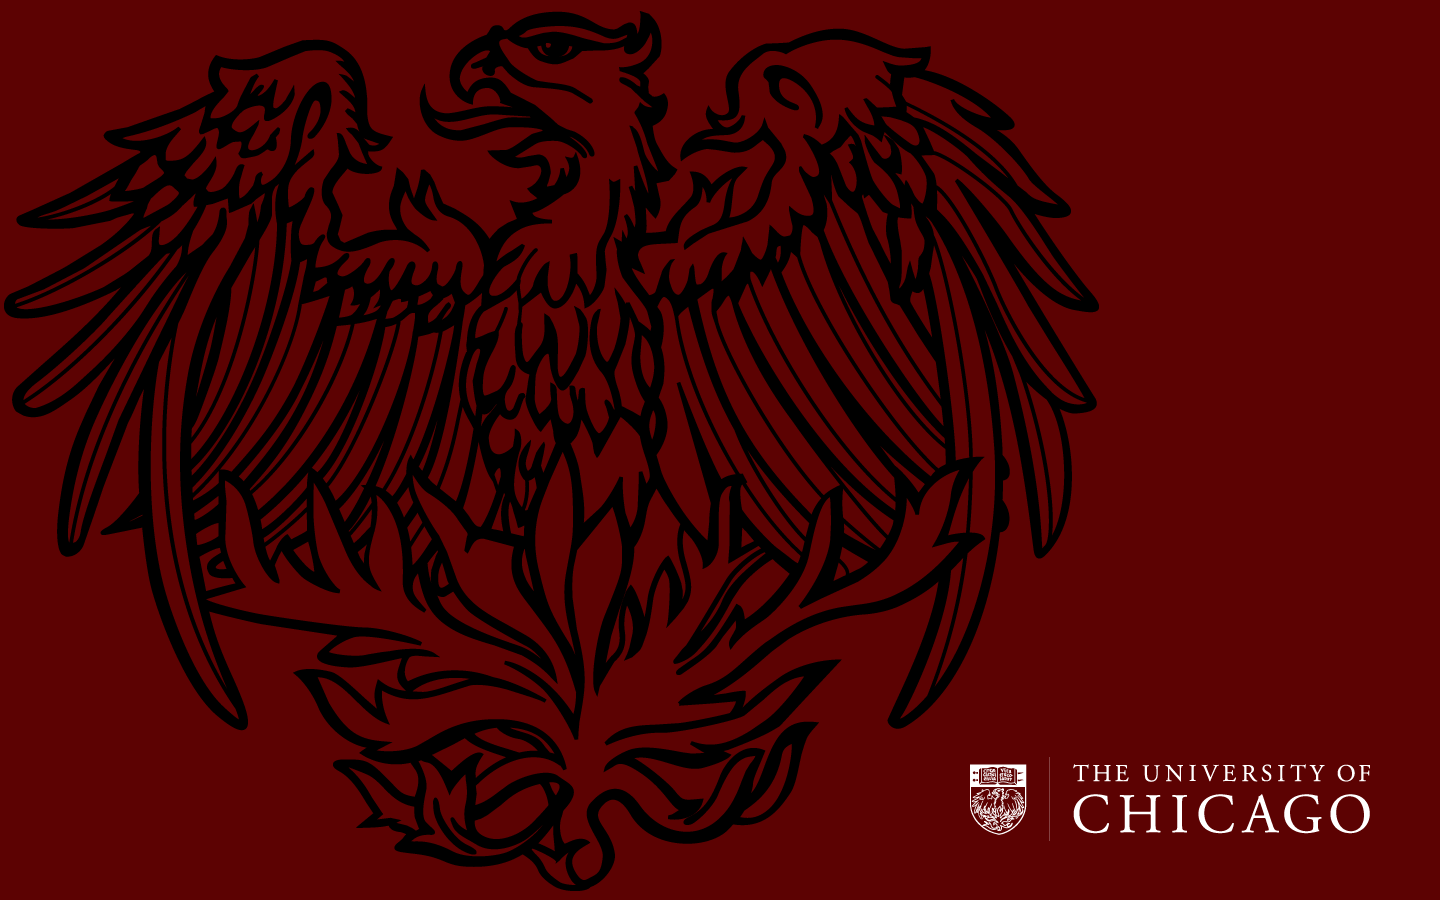 University of Chicago Wallpaper Pictures University of Chicago